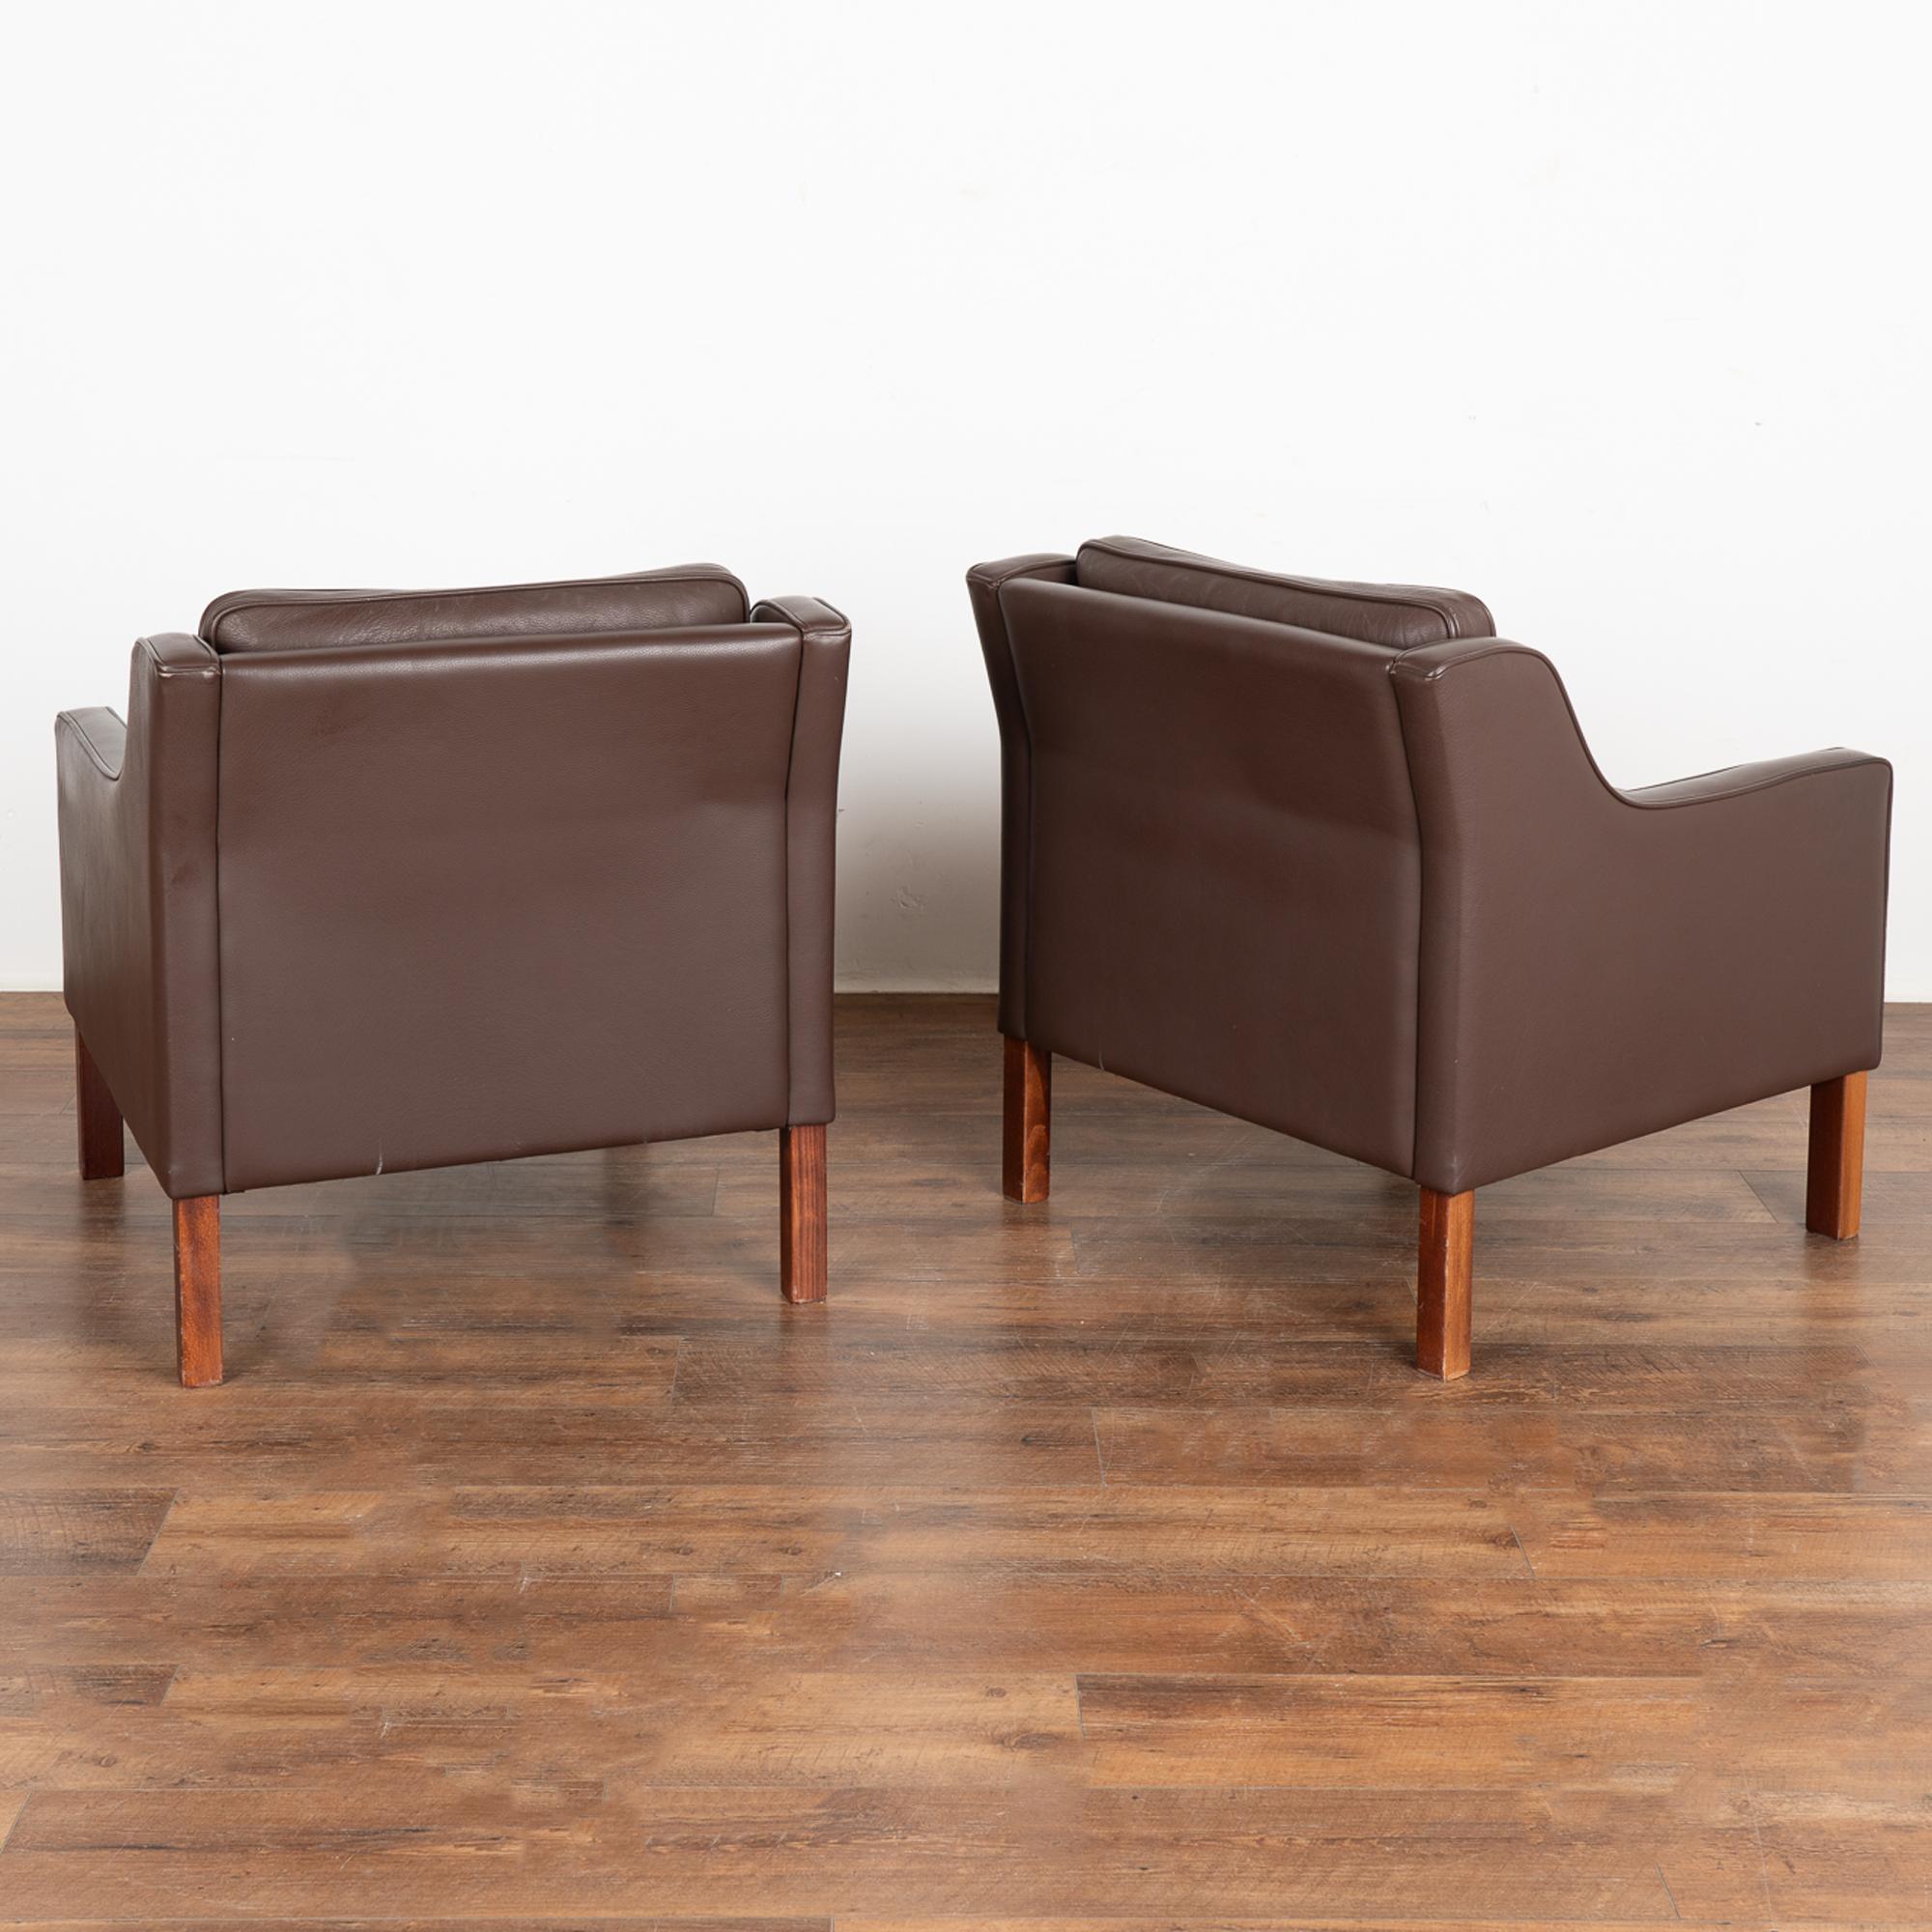 Pair, Midcentury Brown Leather Arm Chairs, Denmark, circa 1960-70 For Sale 4